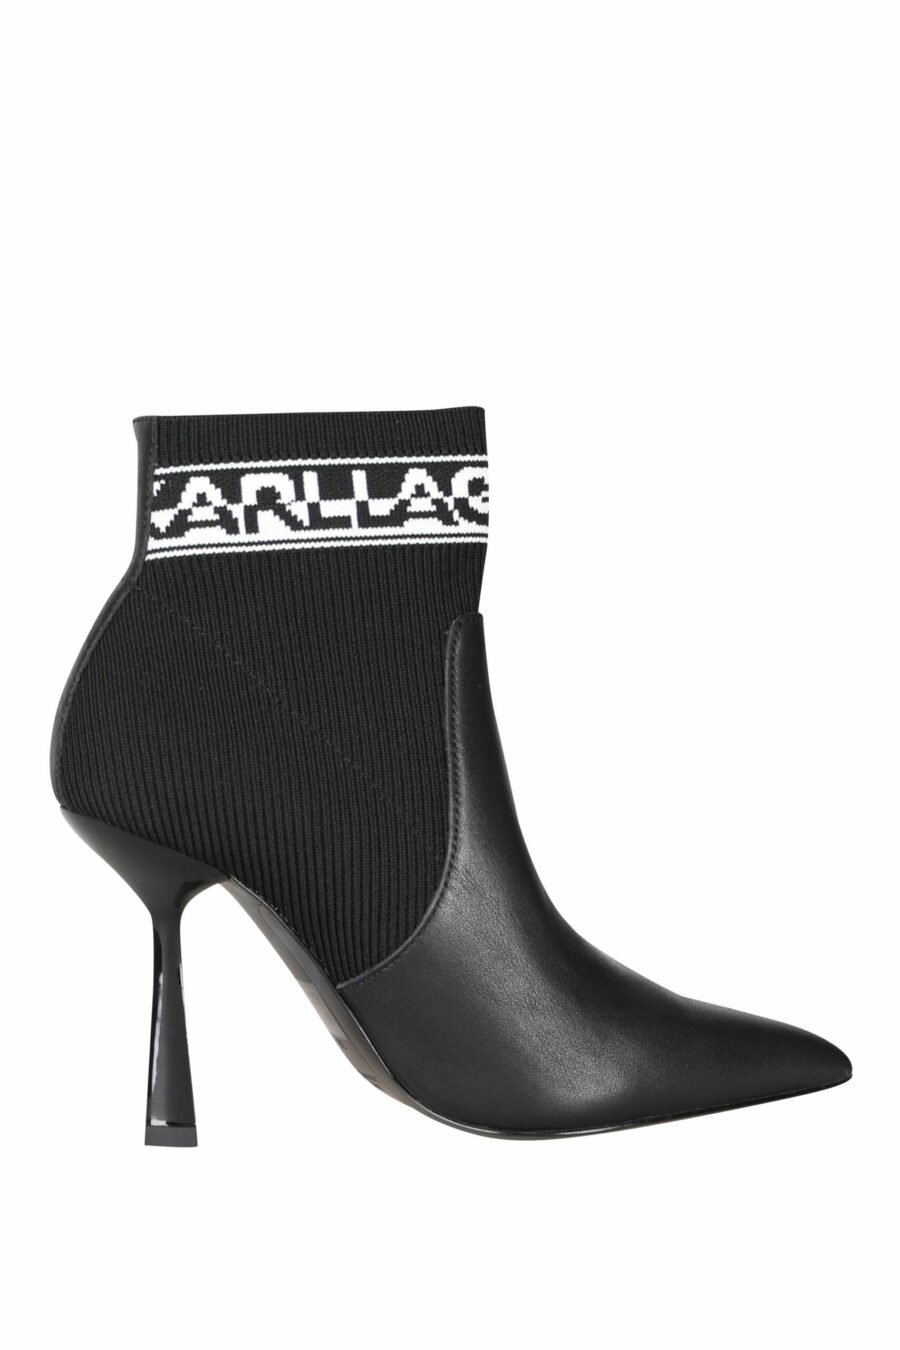 Black ankle boots "Pandara" sock style with heel and logo - 5059529280429 2 scaled